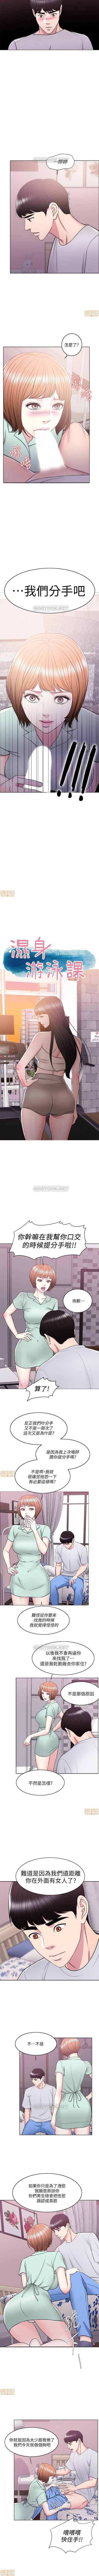 Swimpool | 濕身游泳課 | IS IT OKAY TO GET WET? Ch. 13 [Chinese] Raw 1